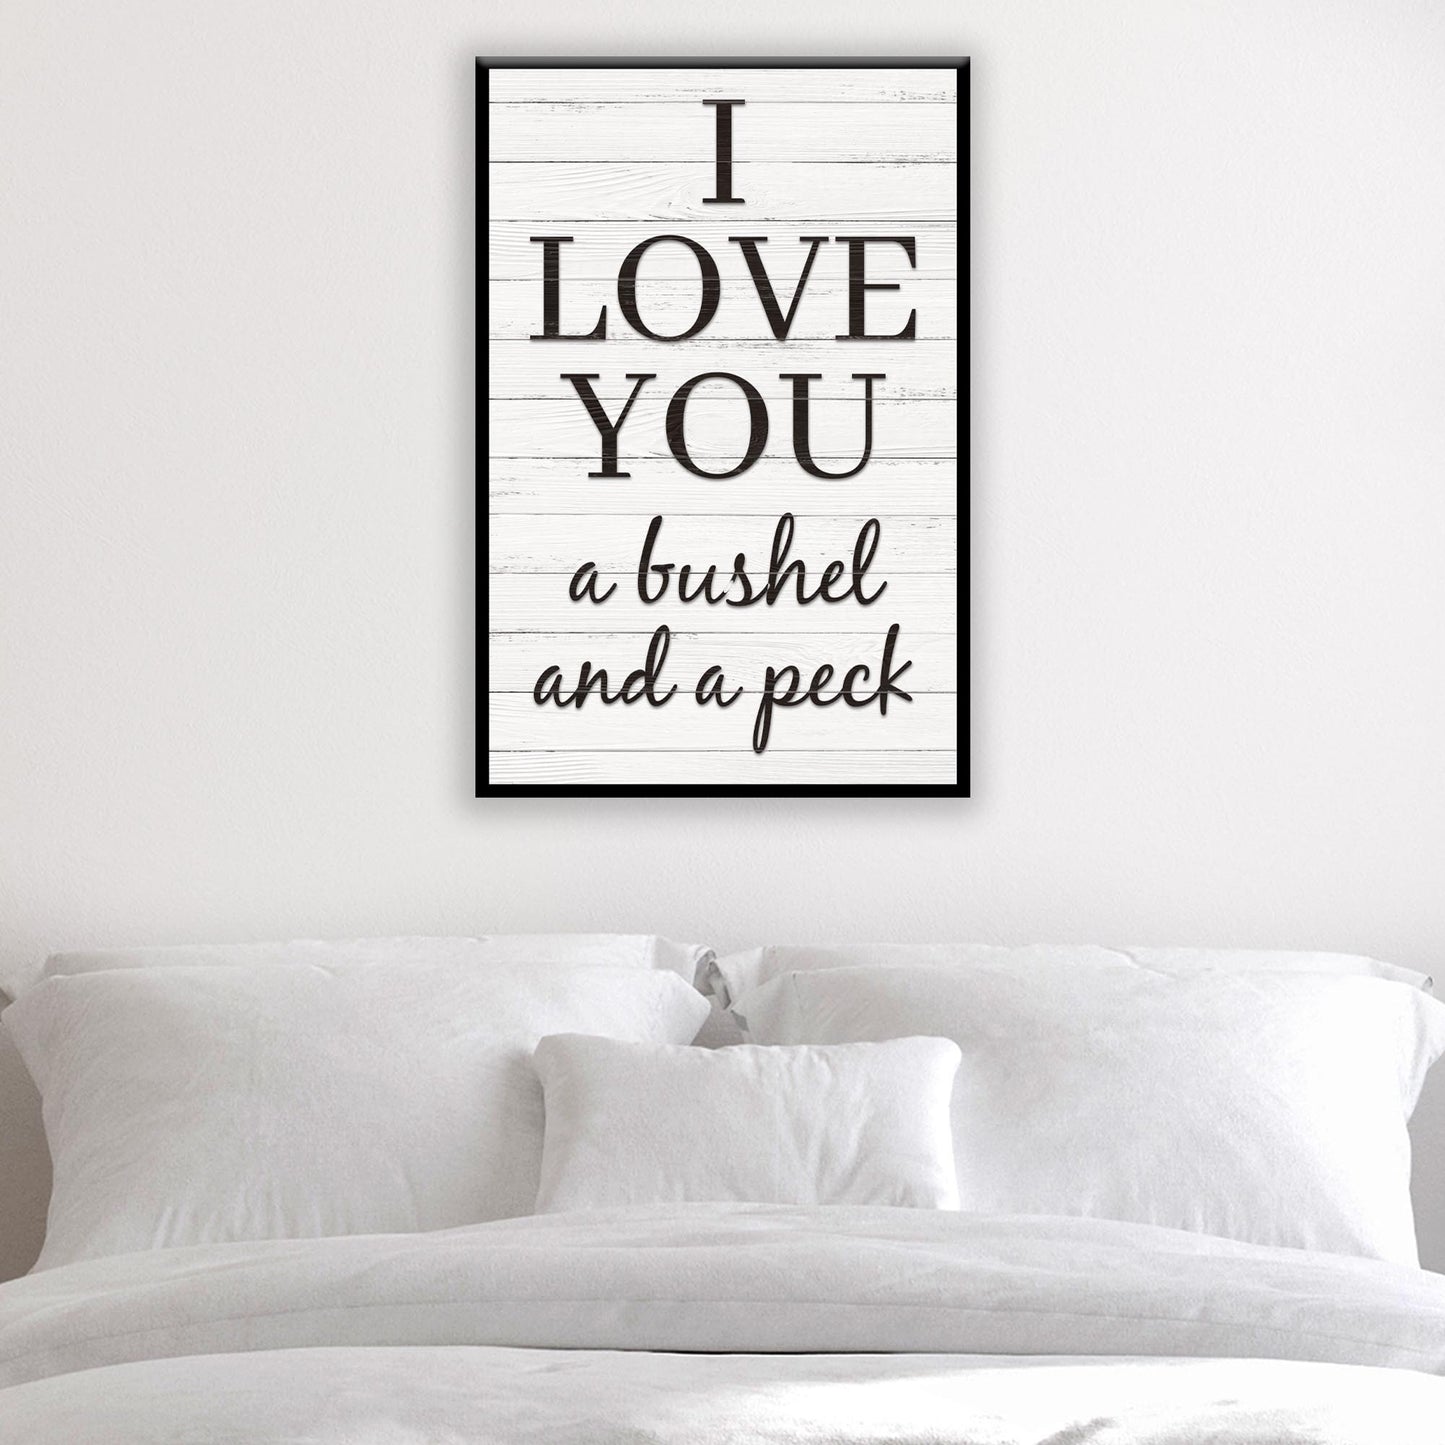 I love You A Bushel & A Peck Sign - Image by Tailored Canvases